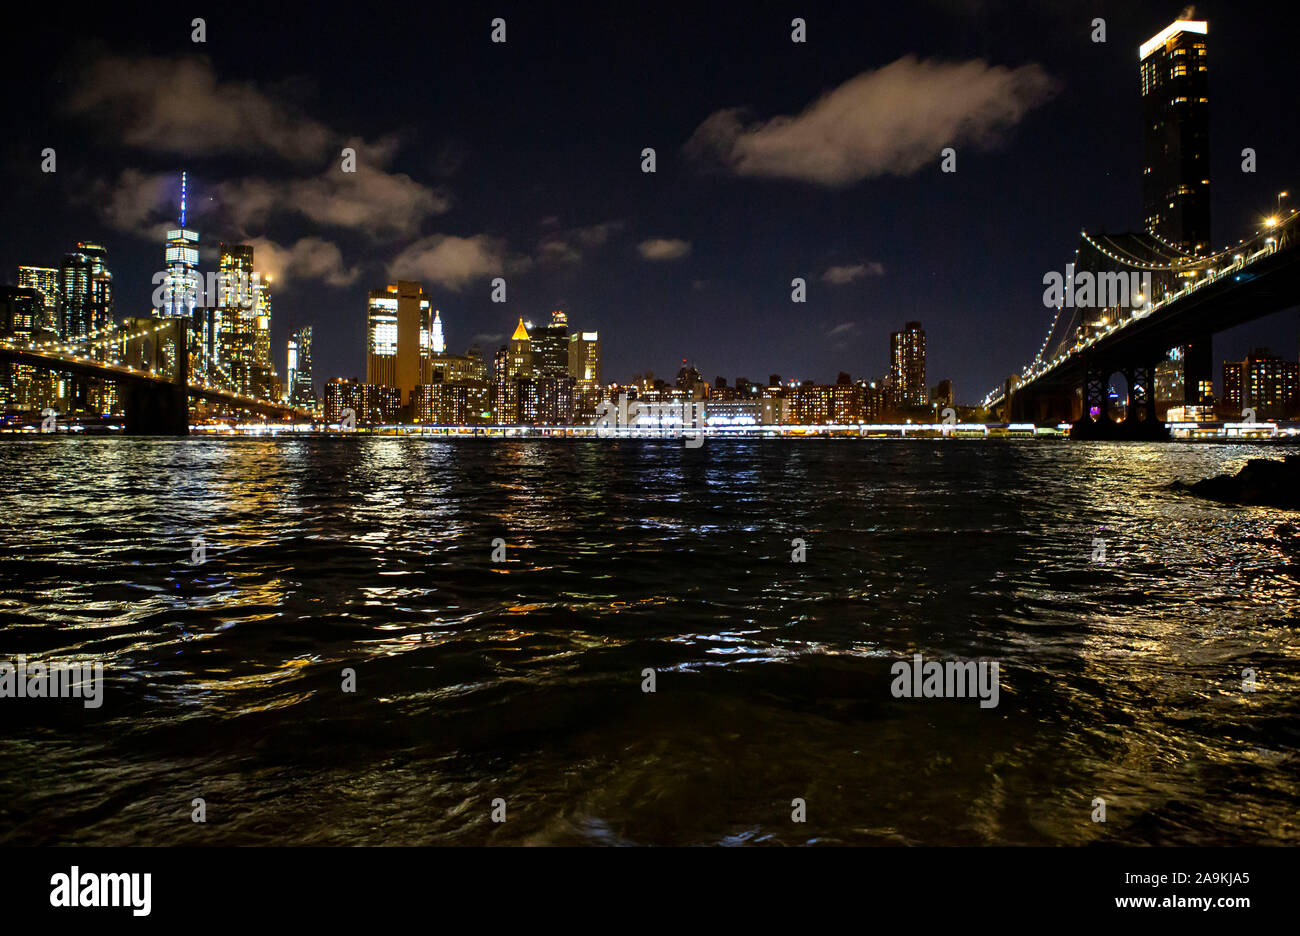 Nighttime cityscape with bridges and river Stock Photo